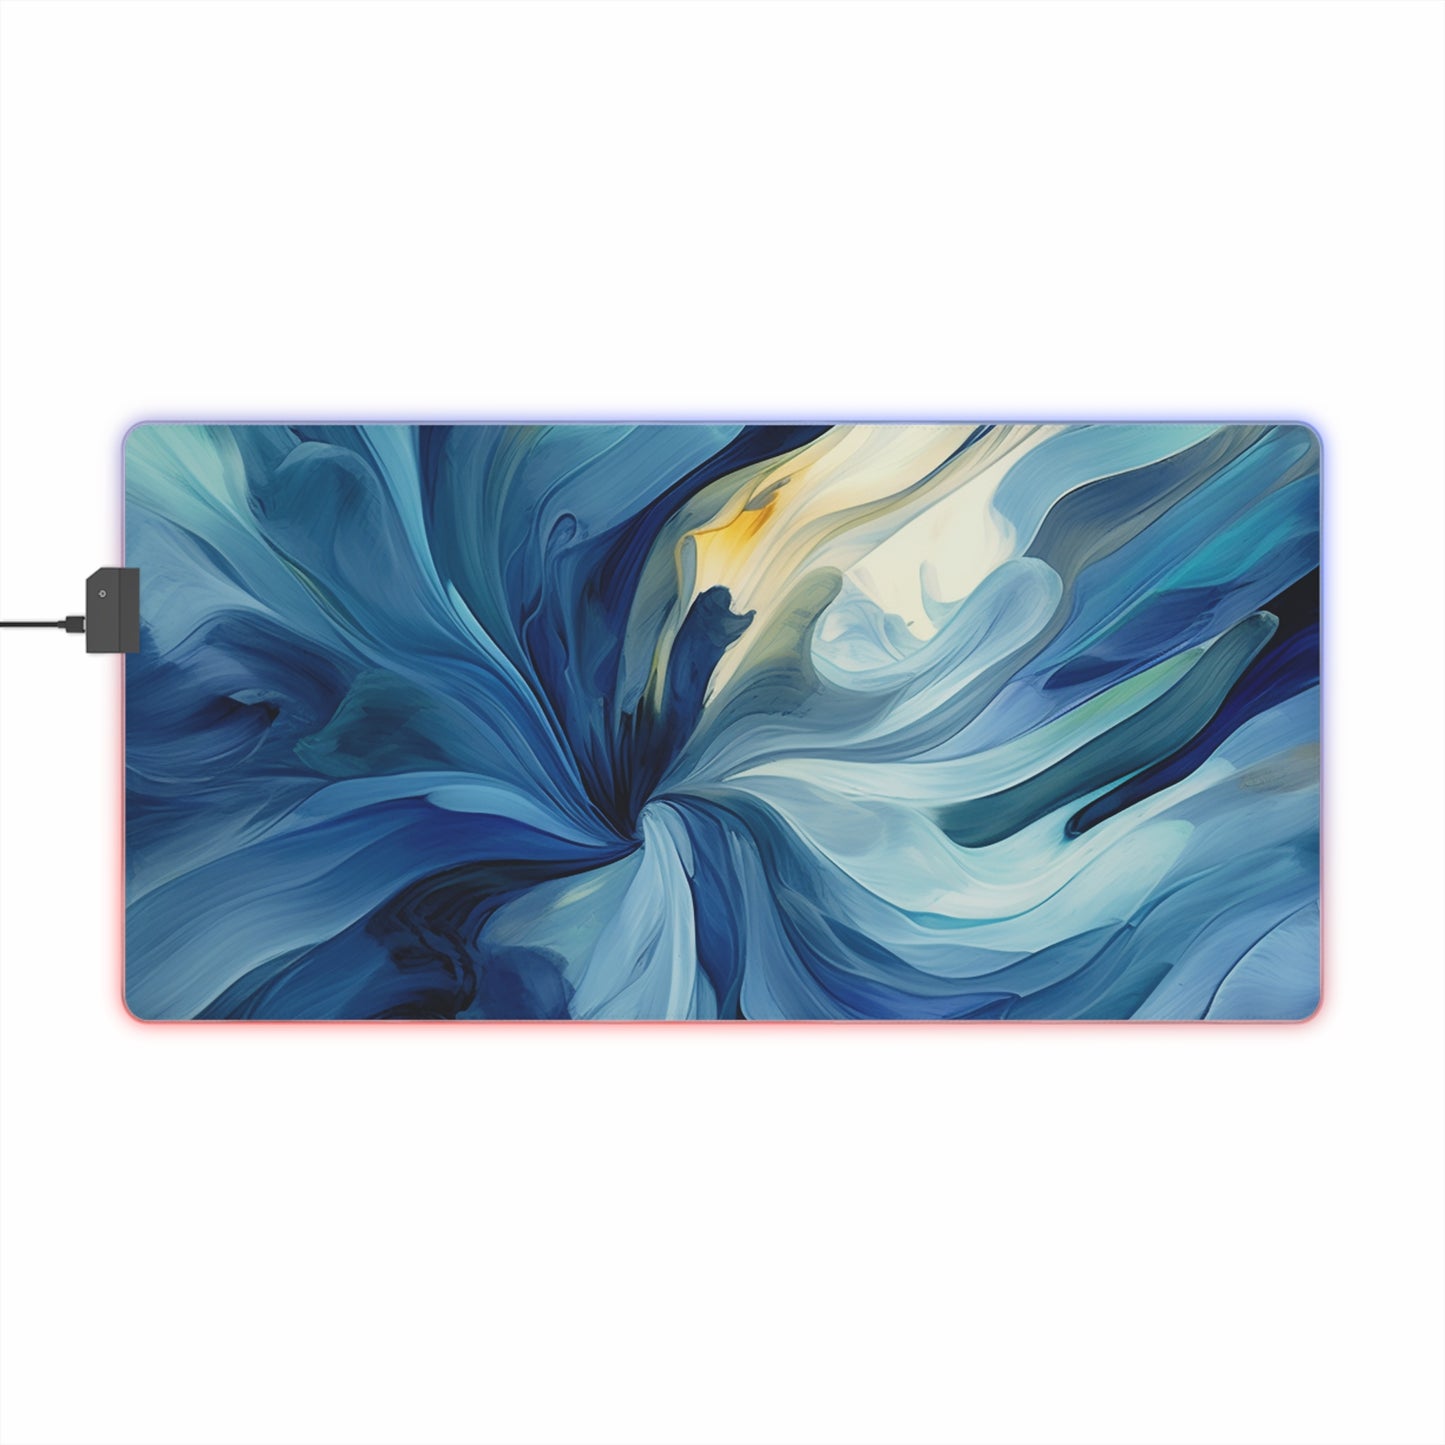 LED Gaming Mouse Pad Blue Tluip Abstract 4